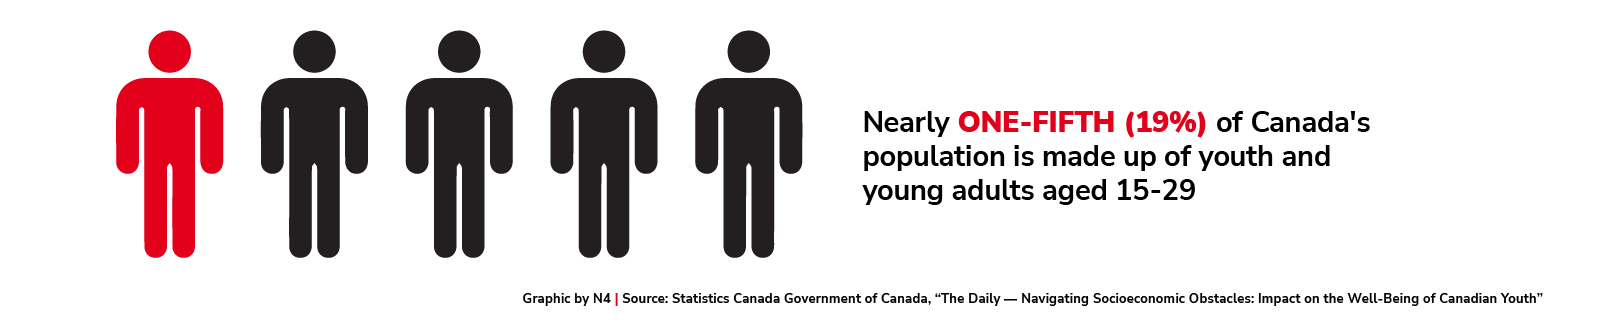 Nearly one-fifth (19%) of Canada's population is made up of youth and young adults aged 15-29